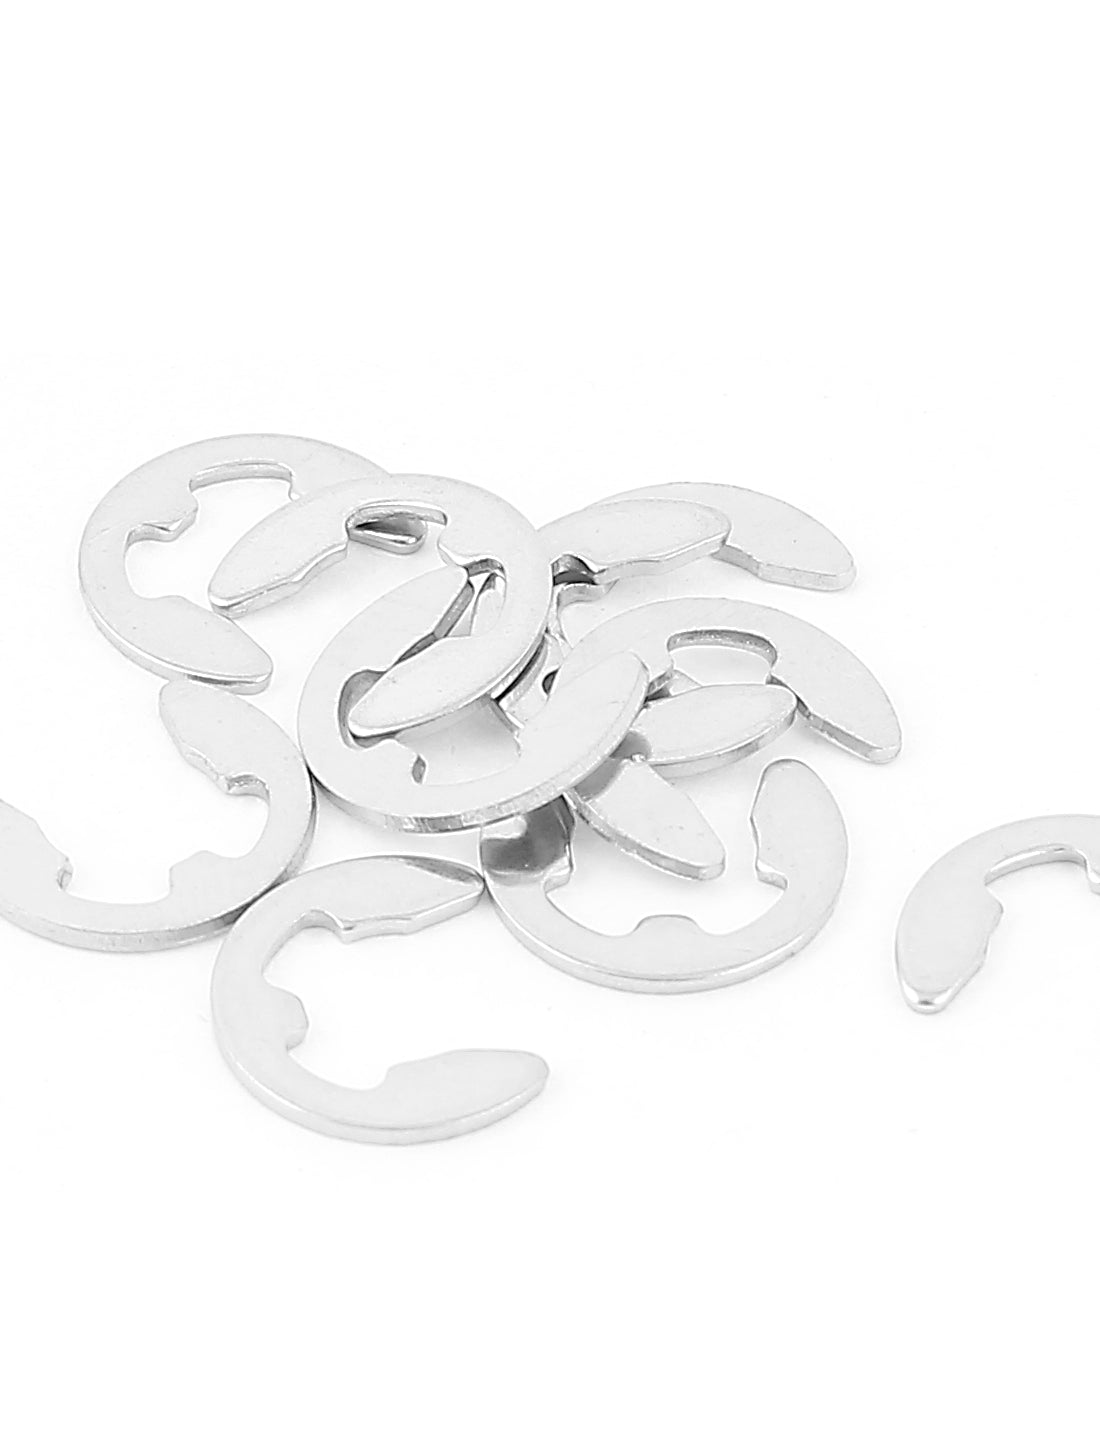 uxcell Uxcell 10pcs 304 Stainless Steel Fastener External Retaining Ring E-Clip Circlip 7mm